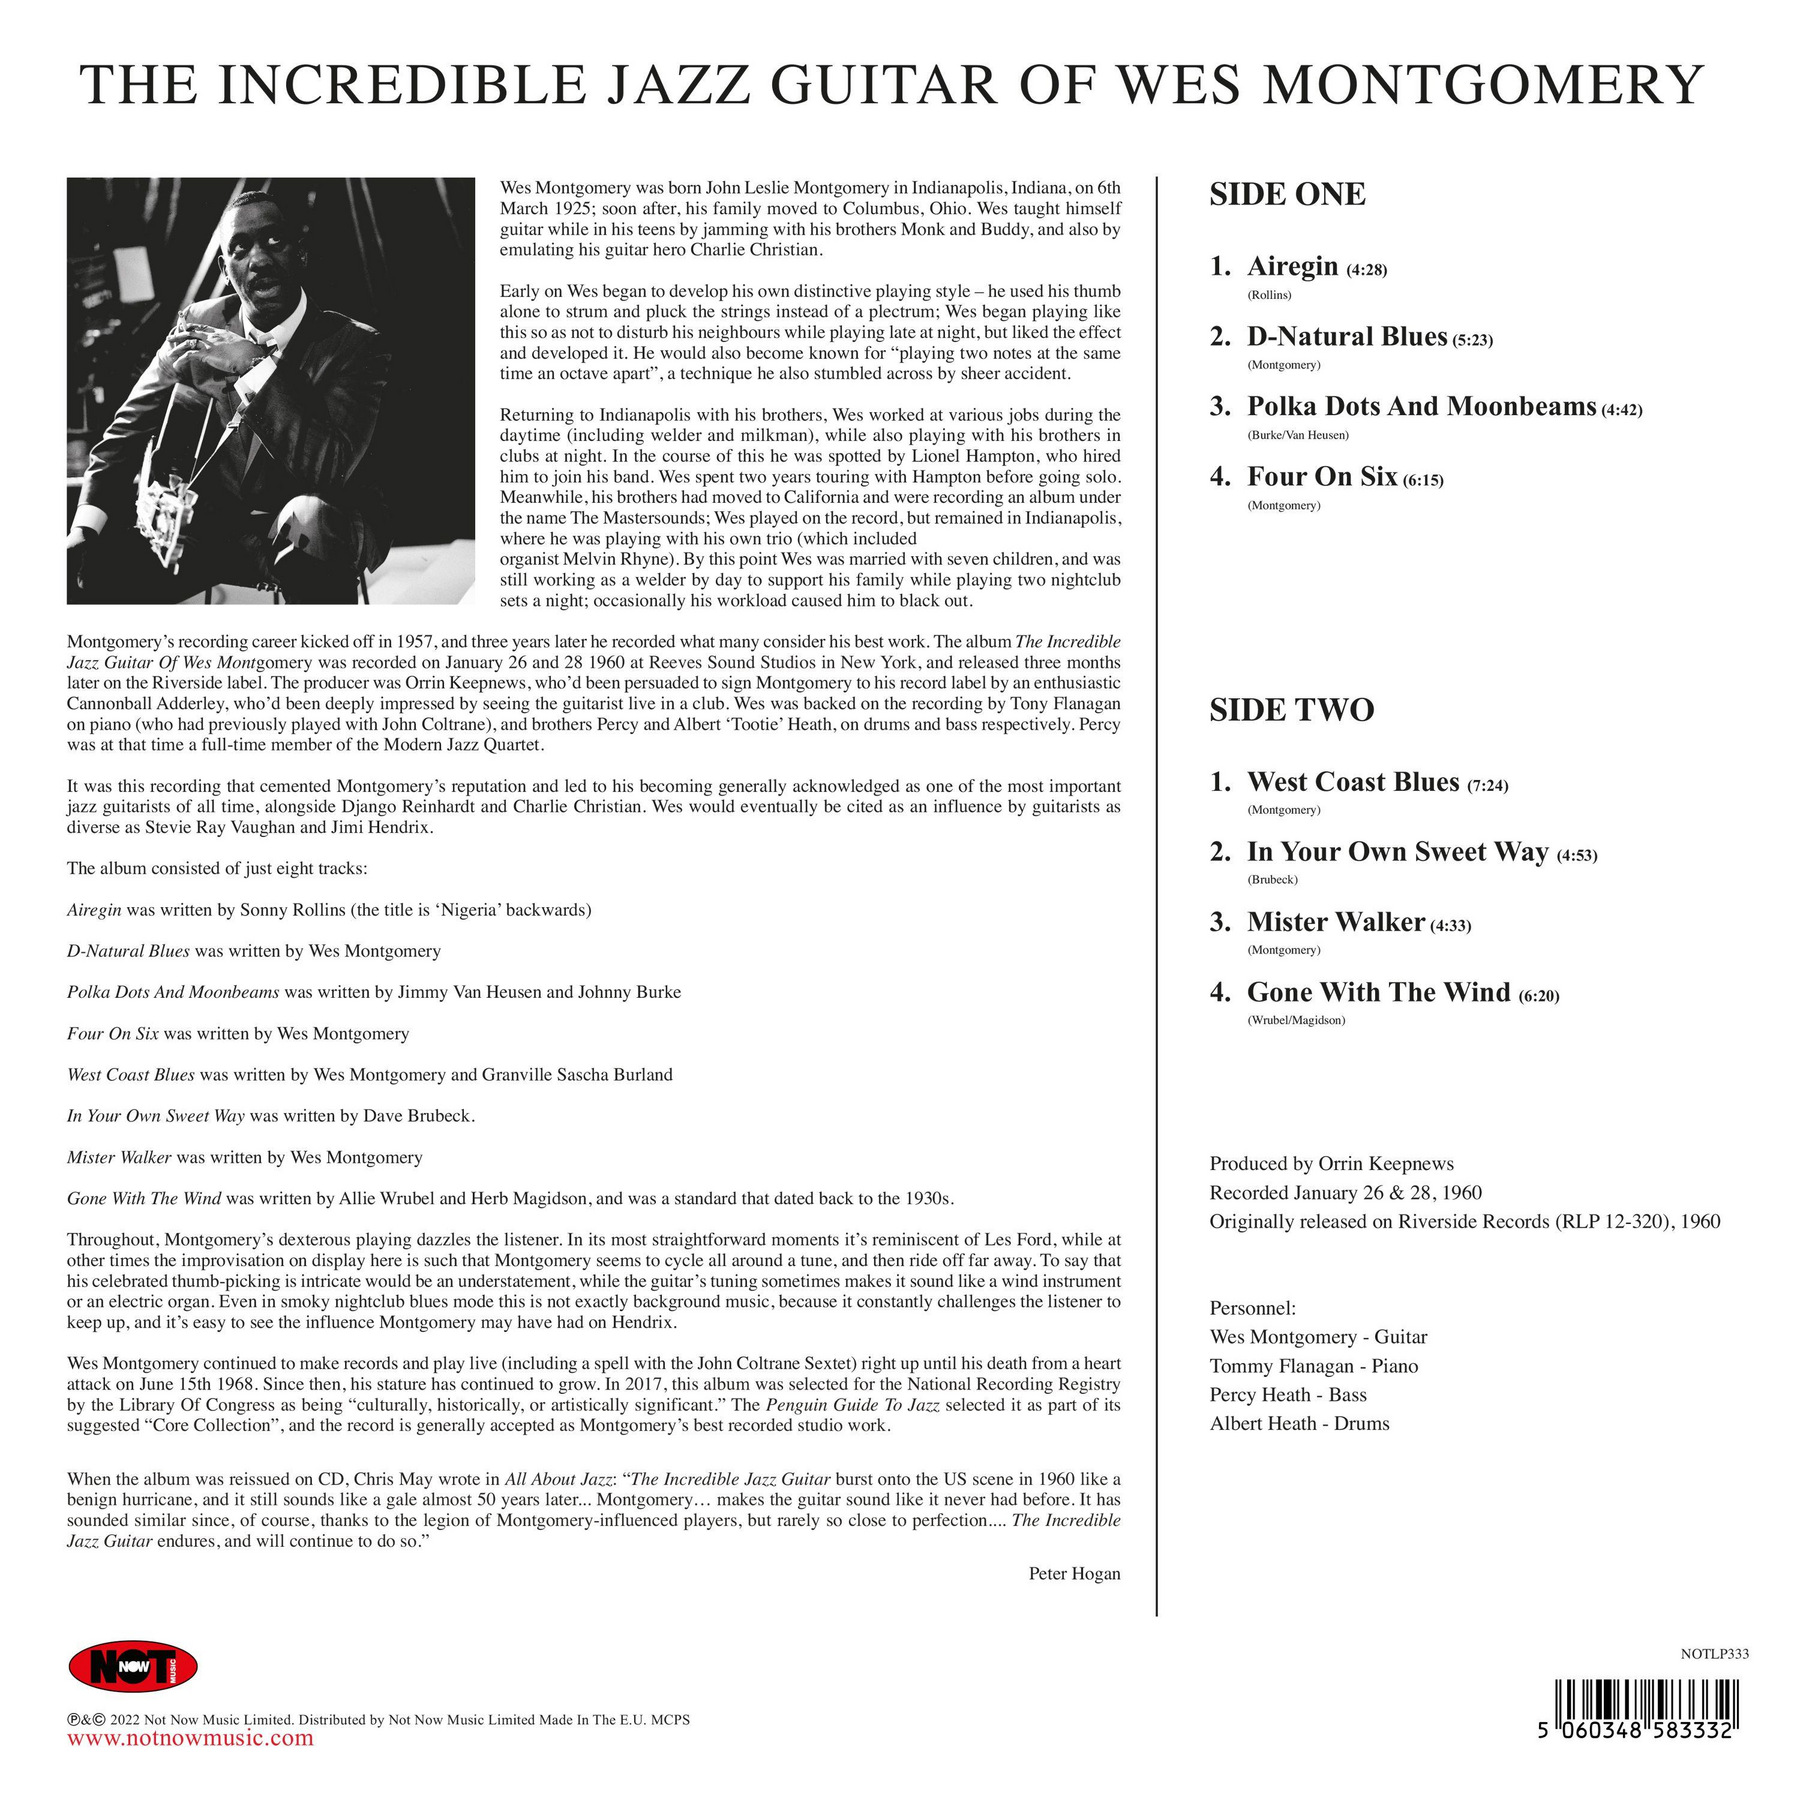 Wes Montgomery - The Incredible Jazz Guitar Of Wes Montgomery (NOTLP333)